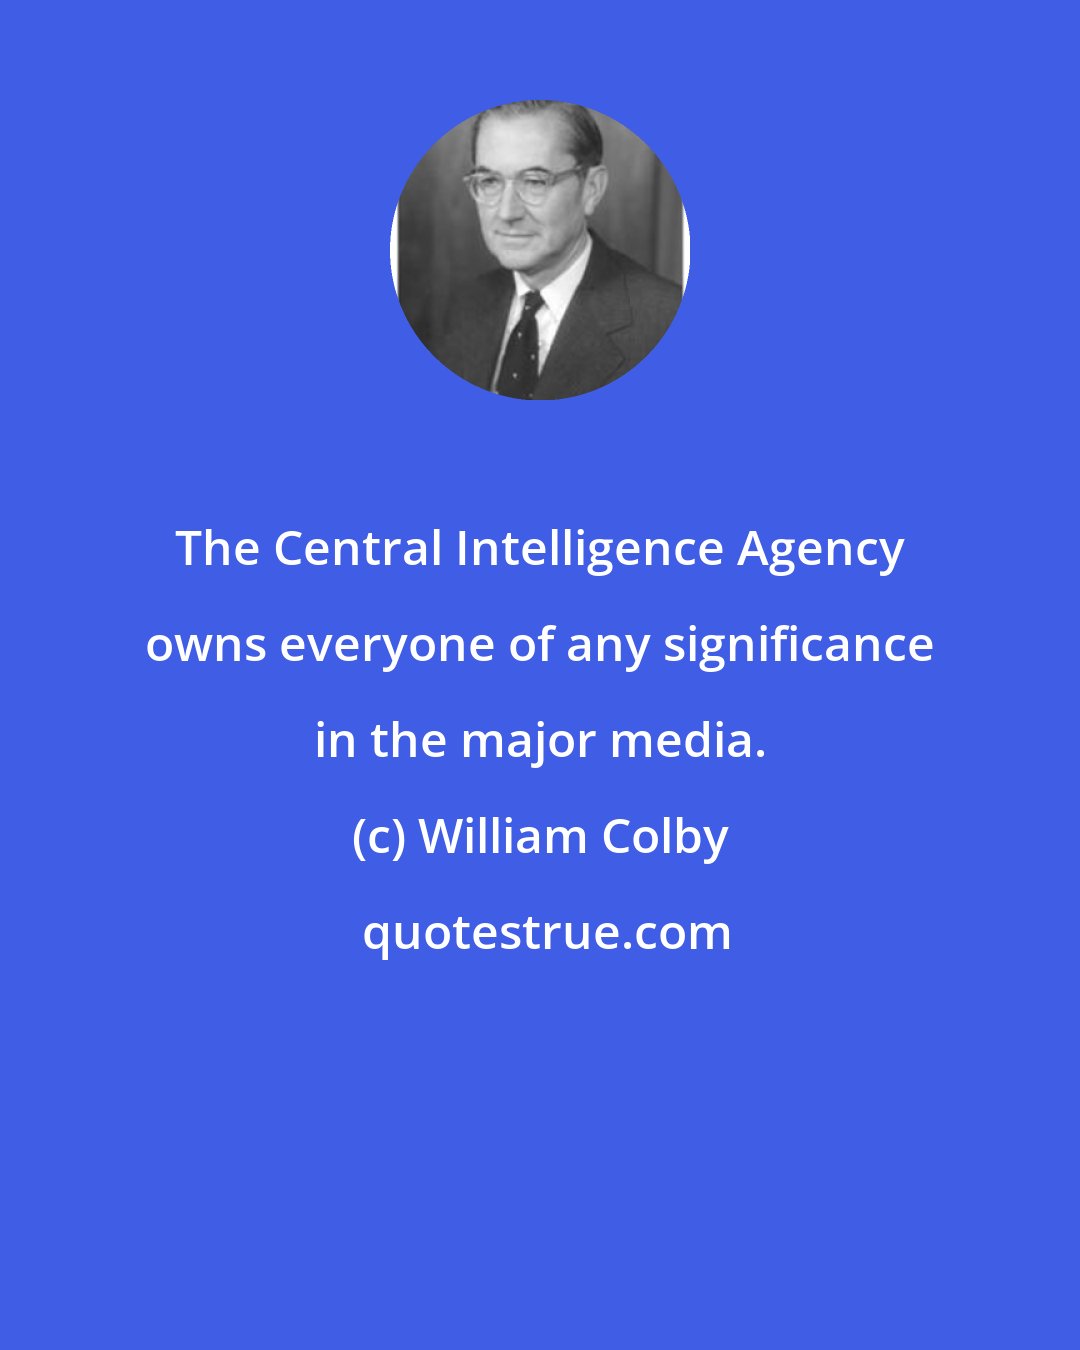 William Colby: The Central Intelligence Agency owns everyone of any significance in the major media.